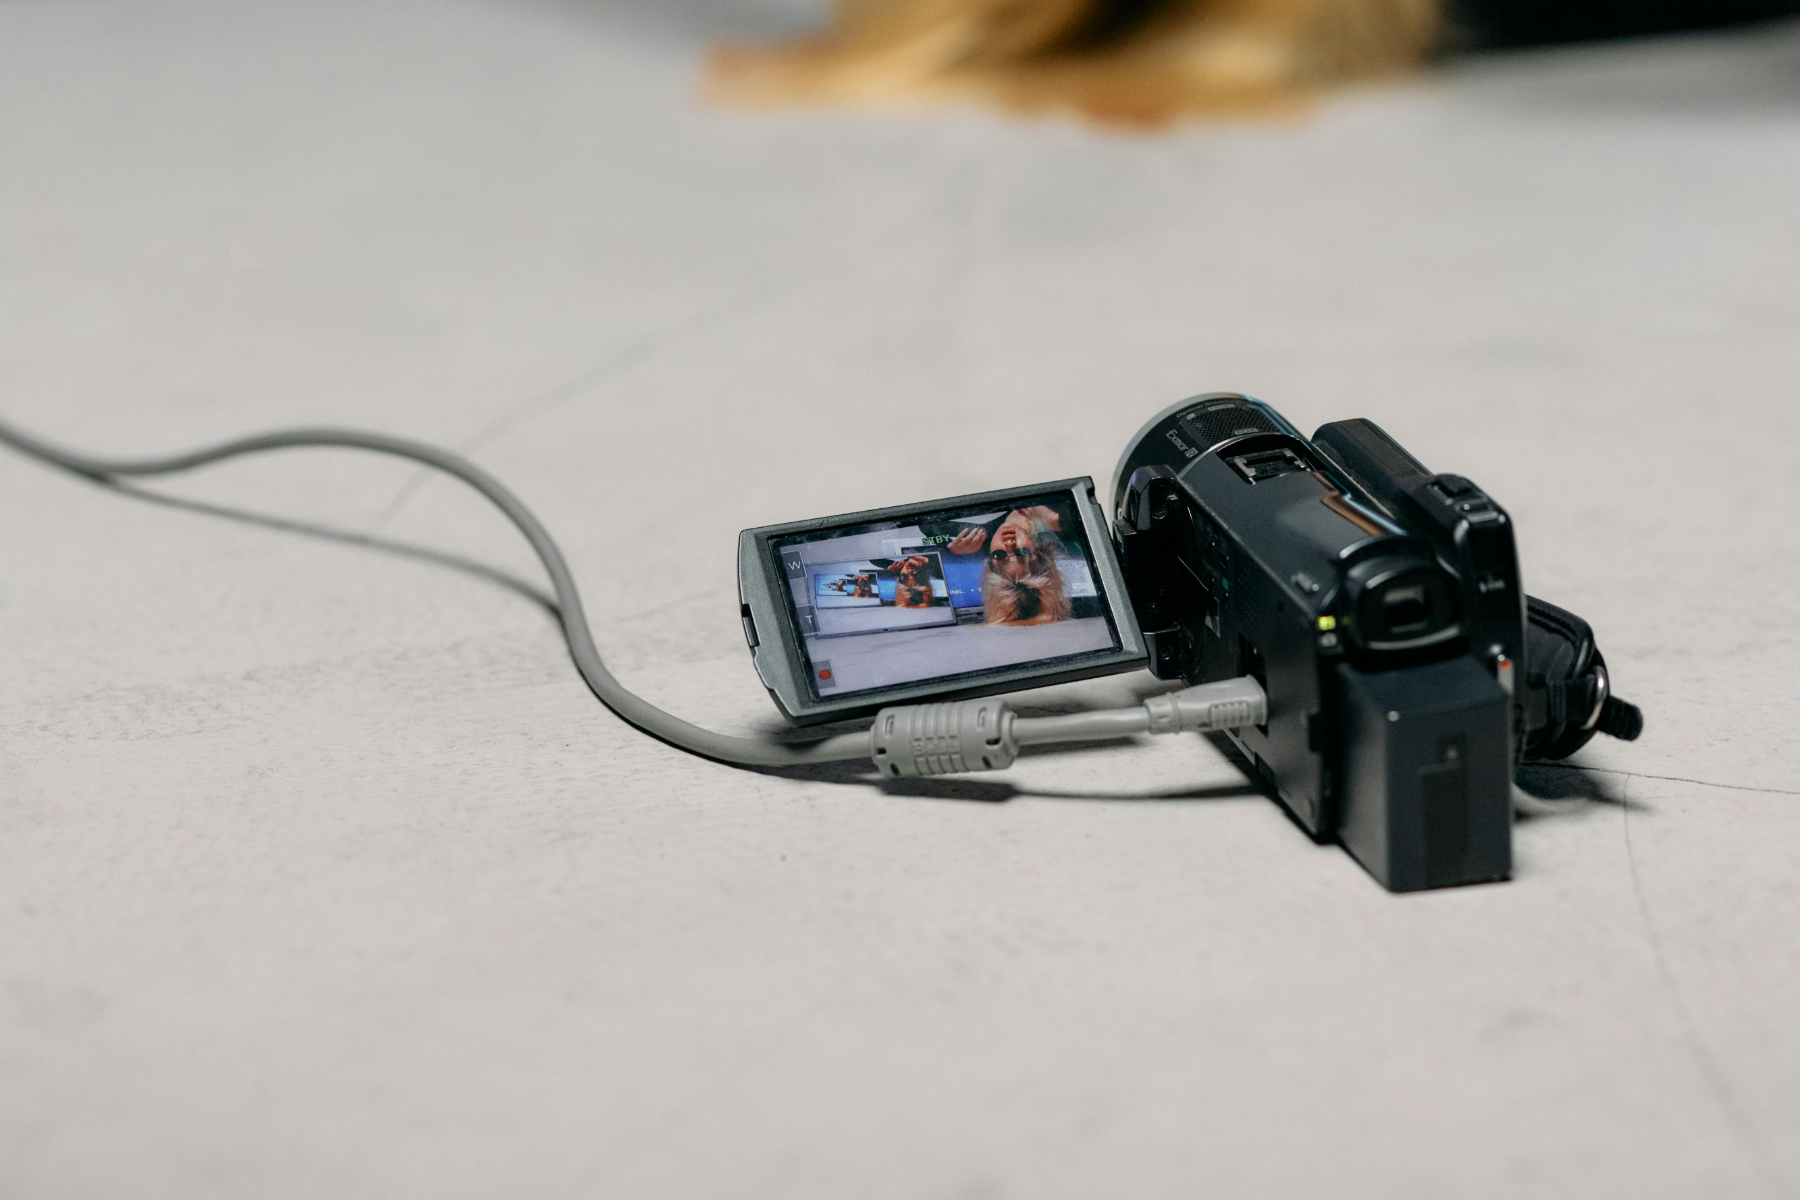 A photo of a video camera on the floor